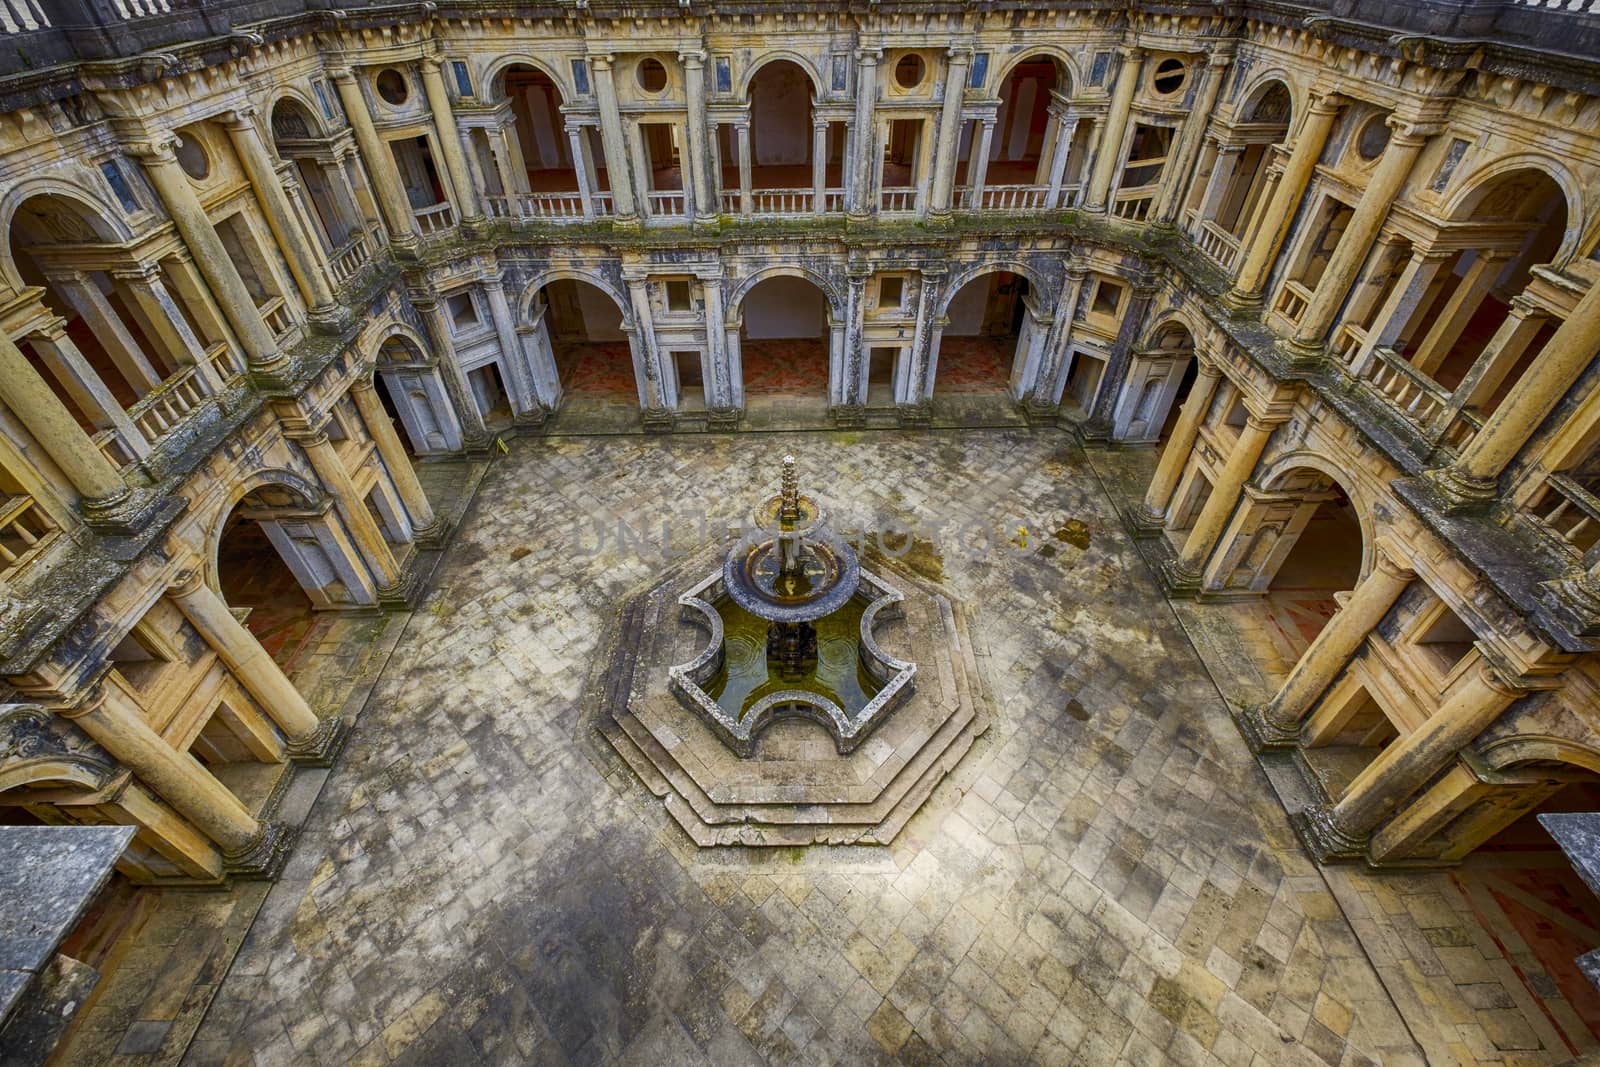 Beautifully preserved castle - palace of the Templars. Courtyard surrounded by galleries. In the center - a fountain with a pool in the shape of a cross. Portugal, Tomar.